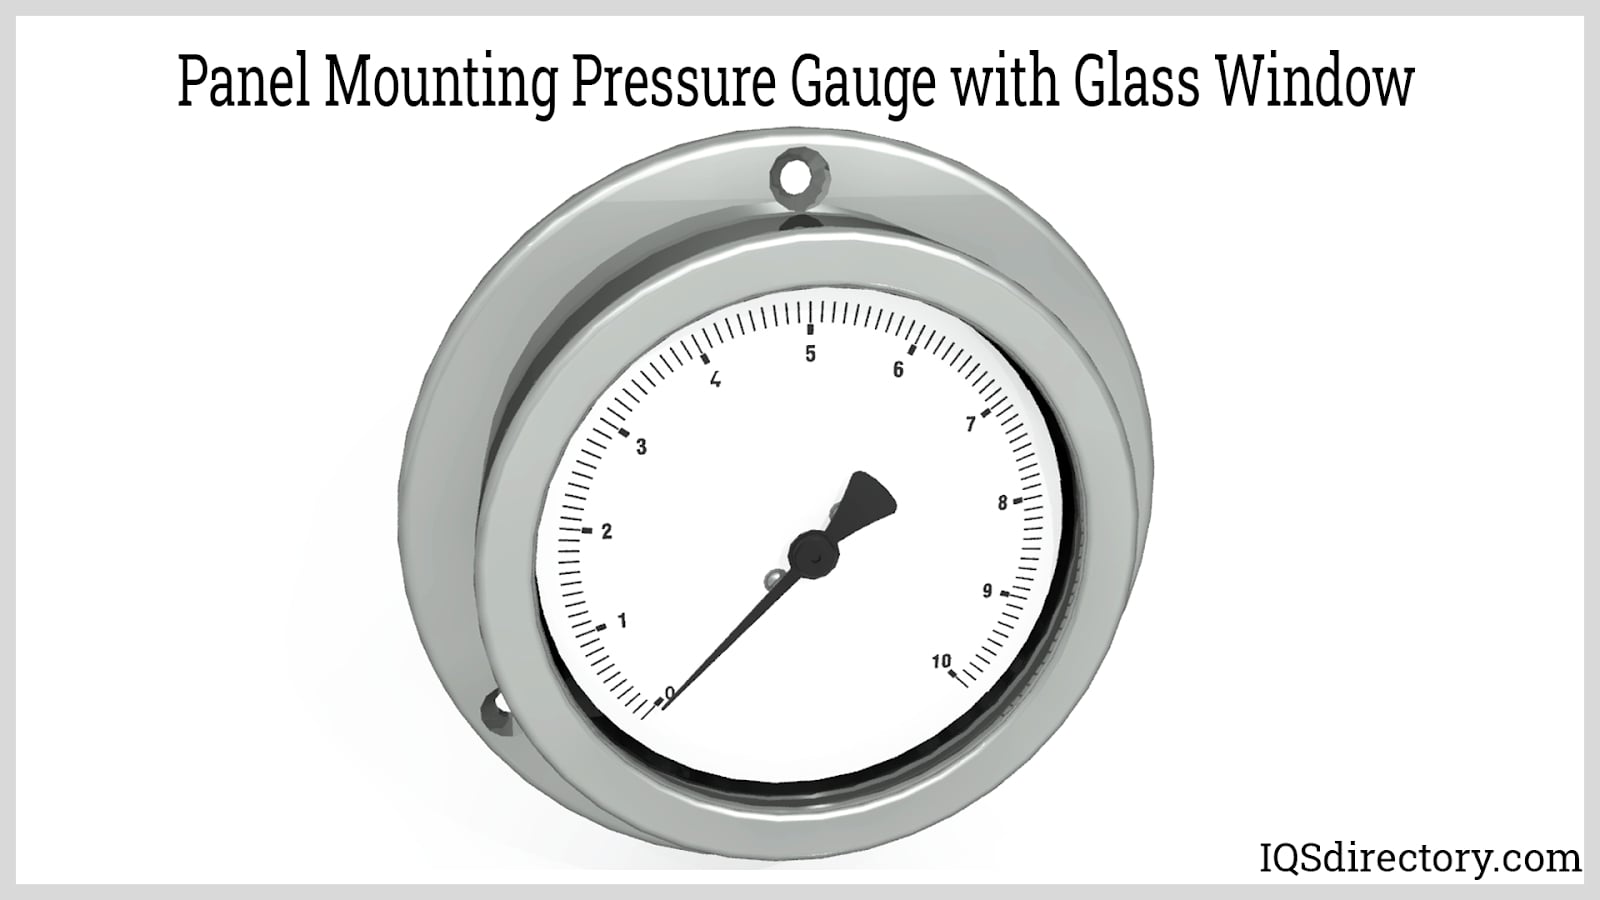 Panel Mounting Pressure Gauge with Glass Window